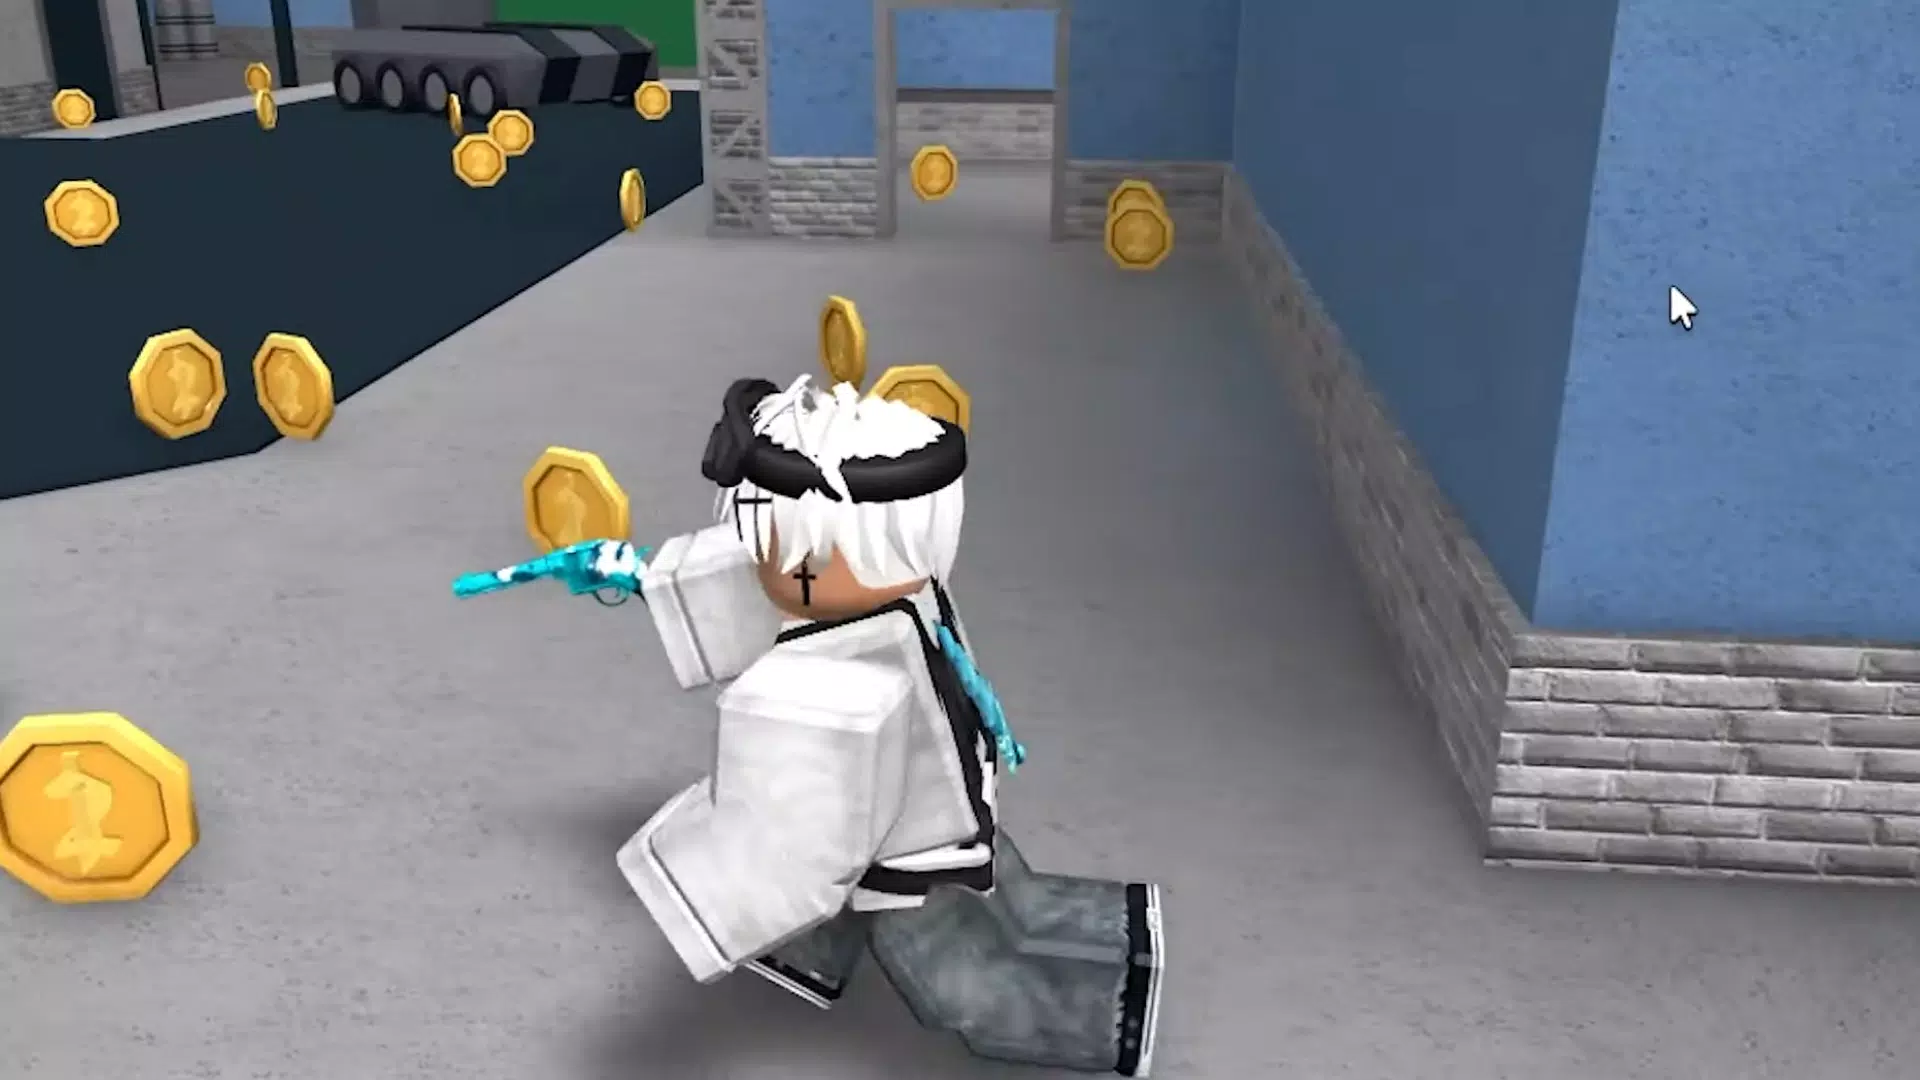 5 Roblox games similar to Murder Mystery 2